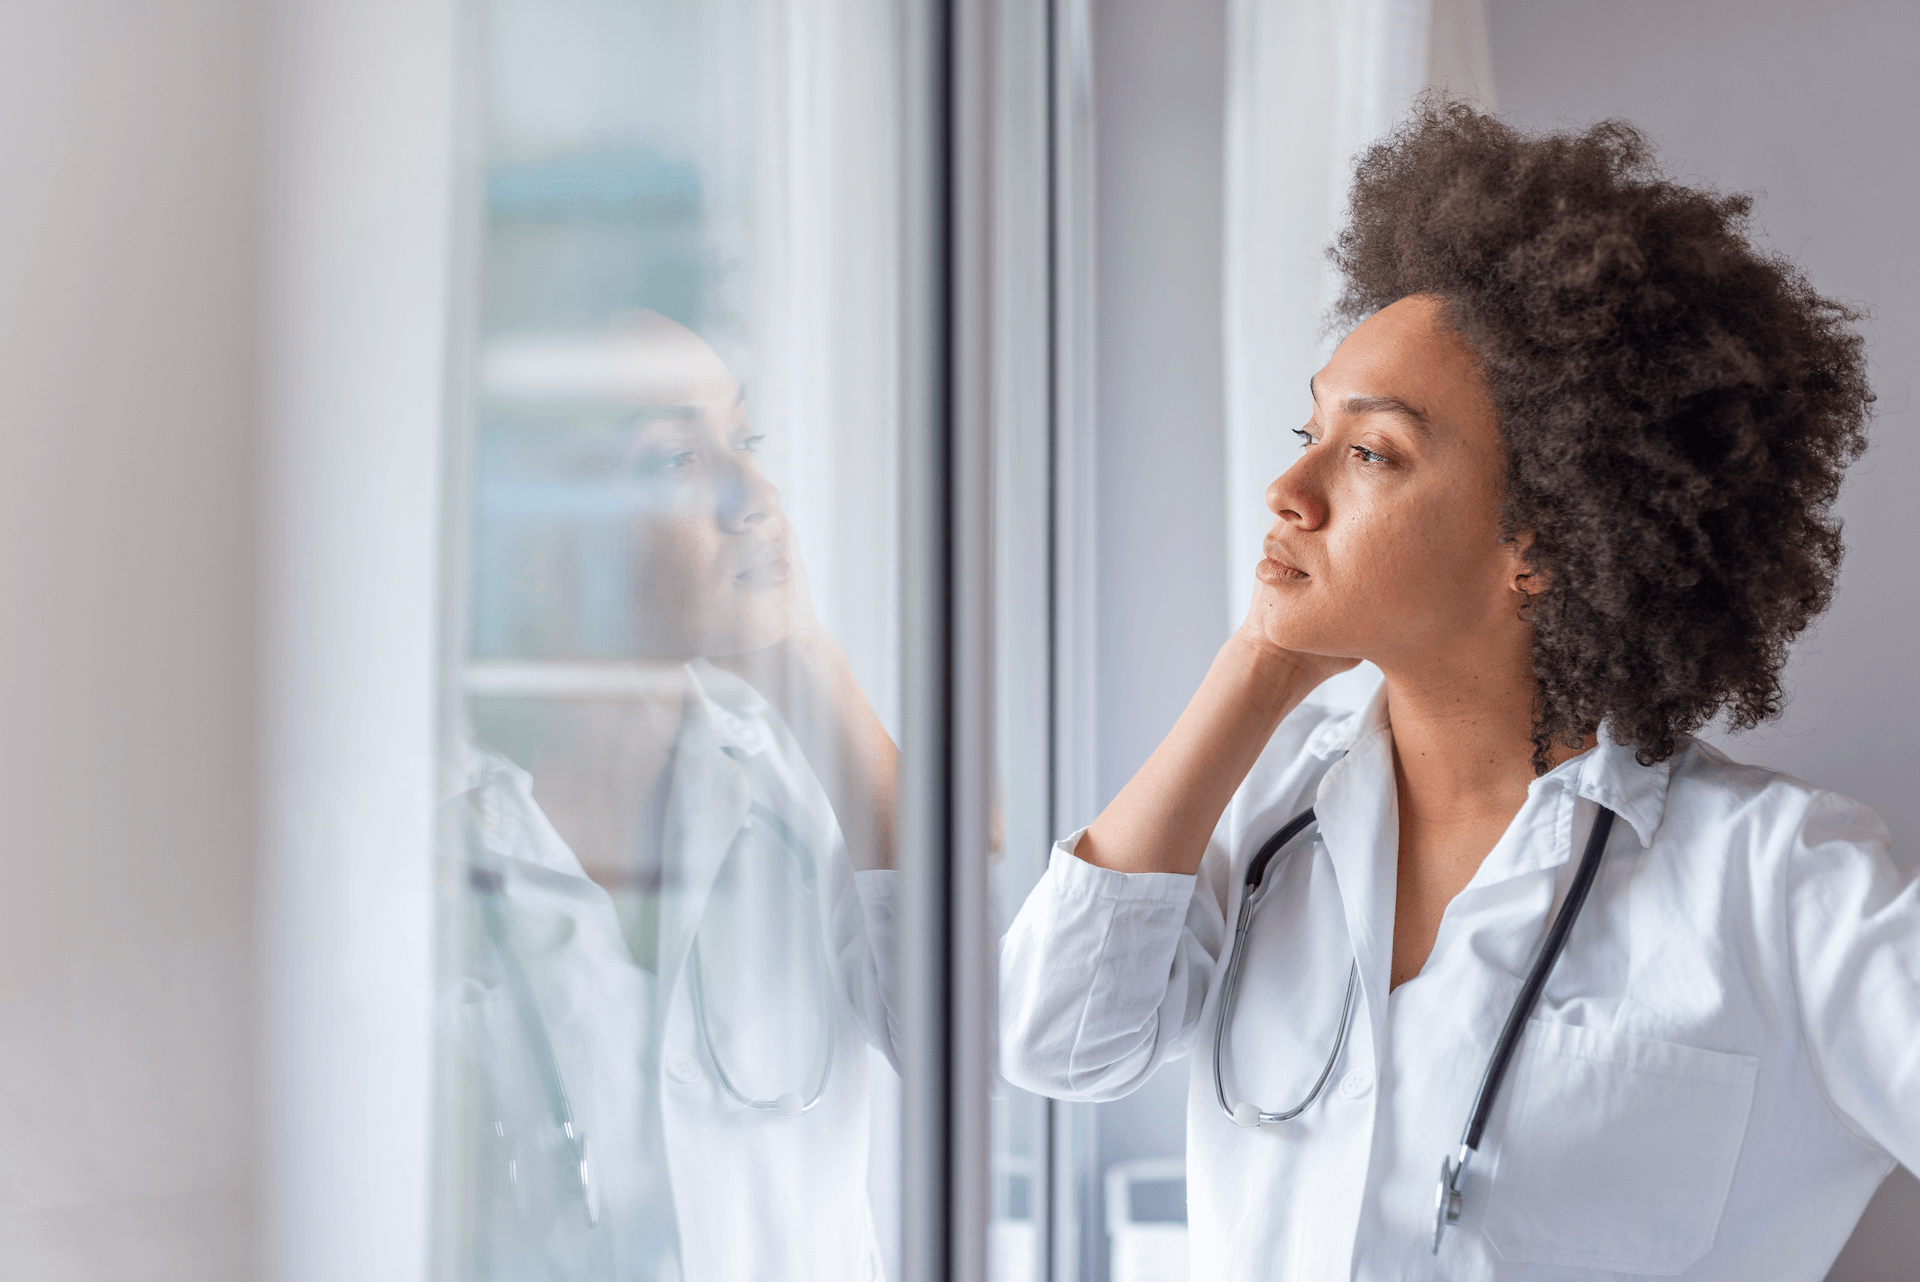 Physician looking out window